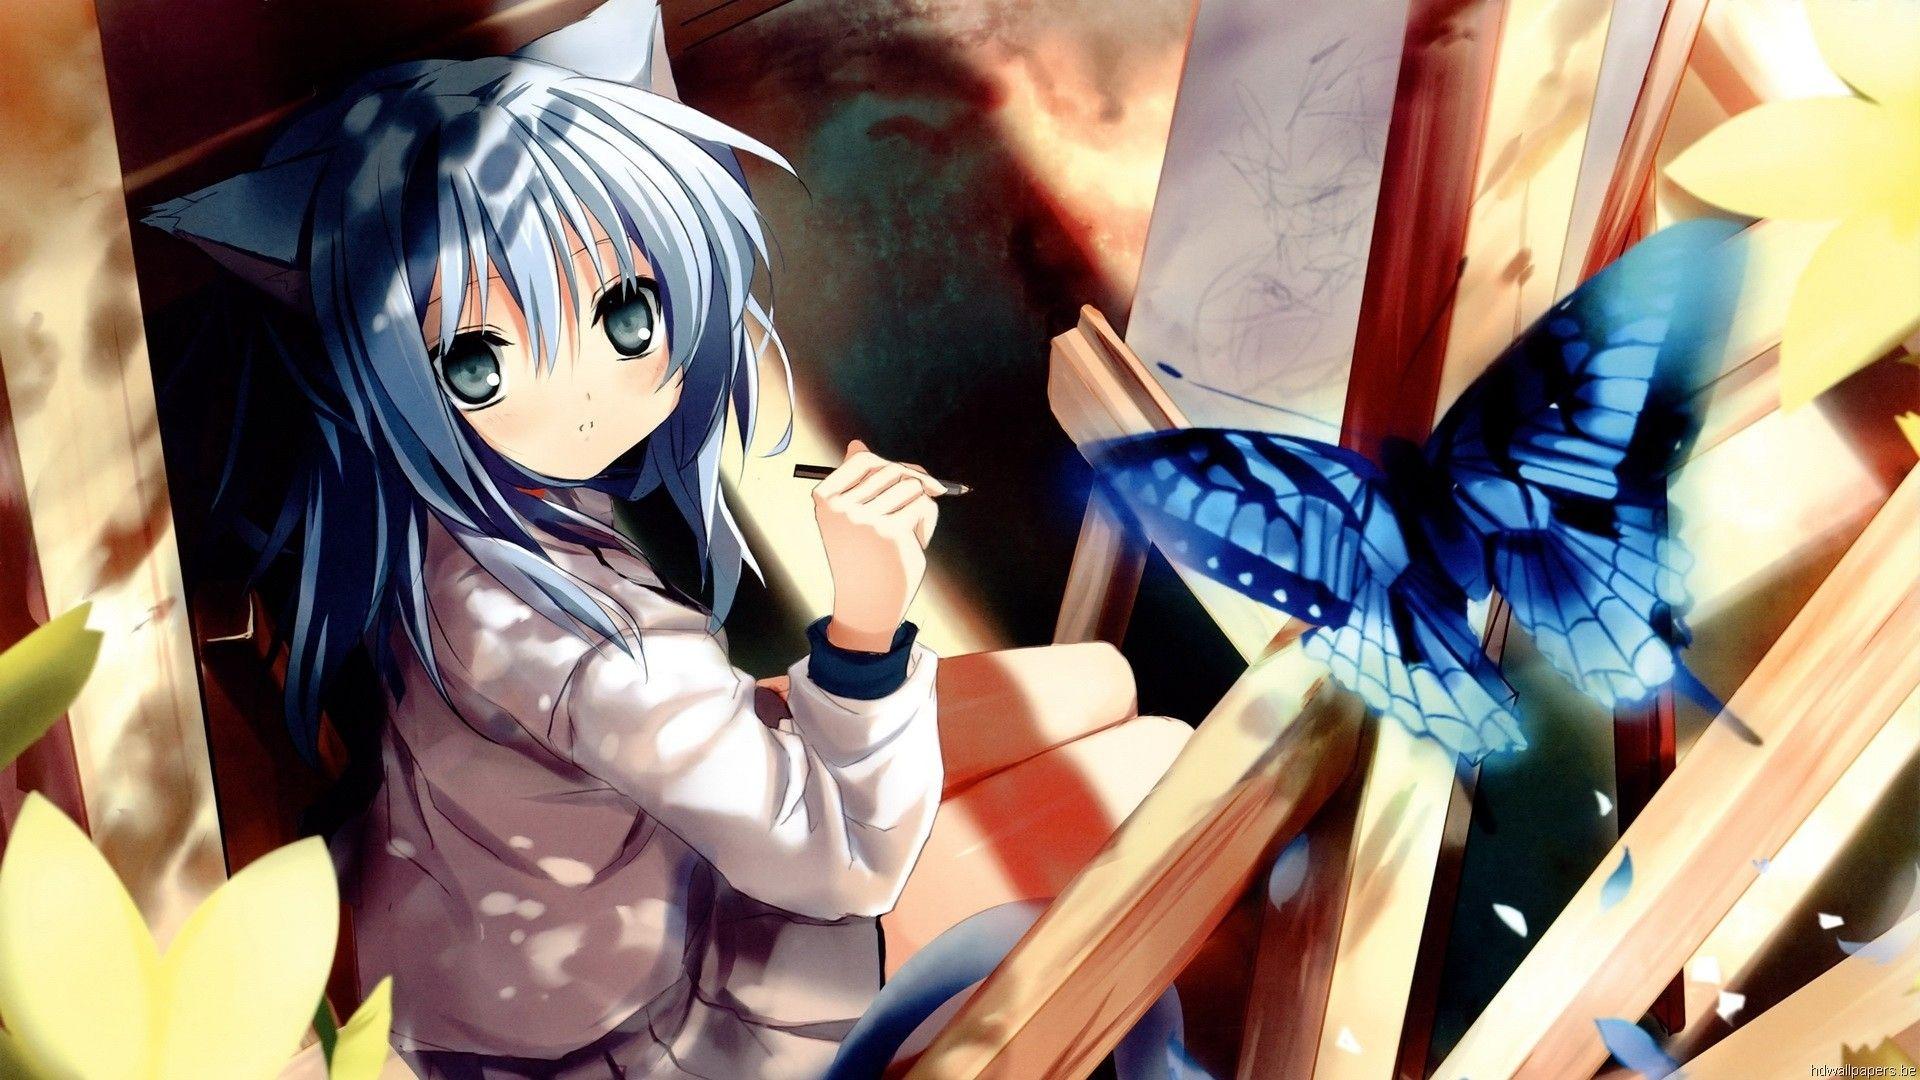 New Anime HD Wallpaper 1920x1080 Download Collection